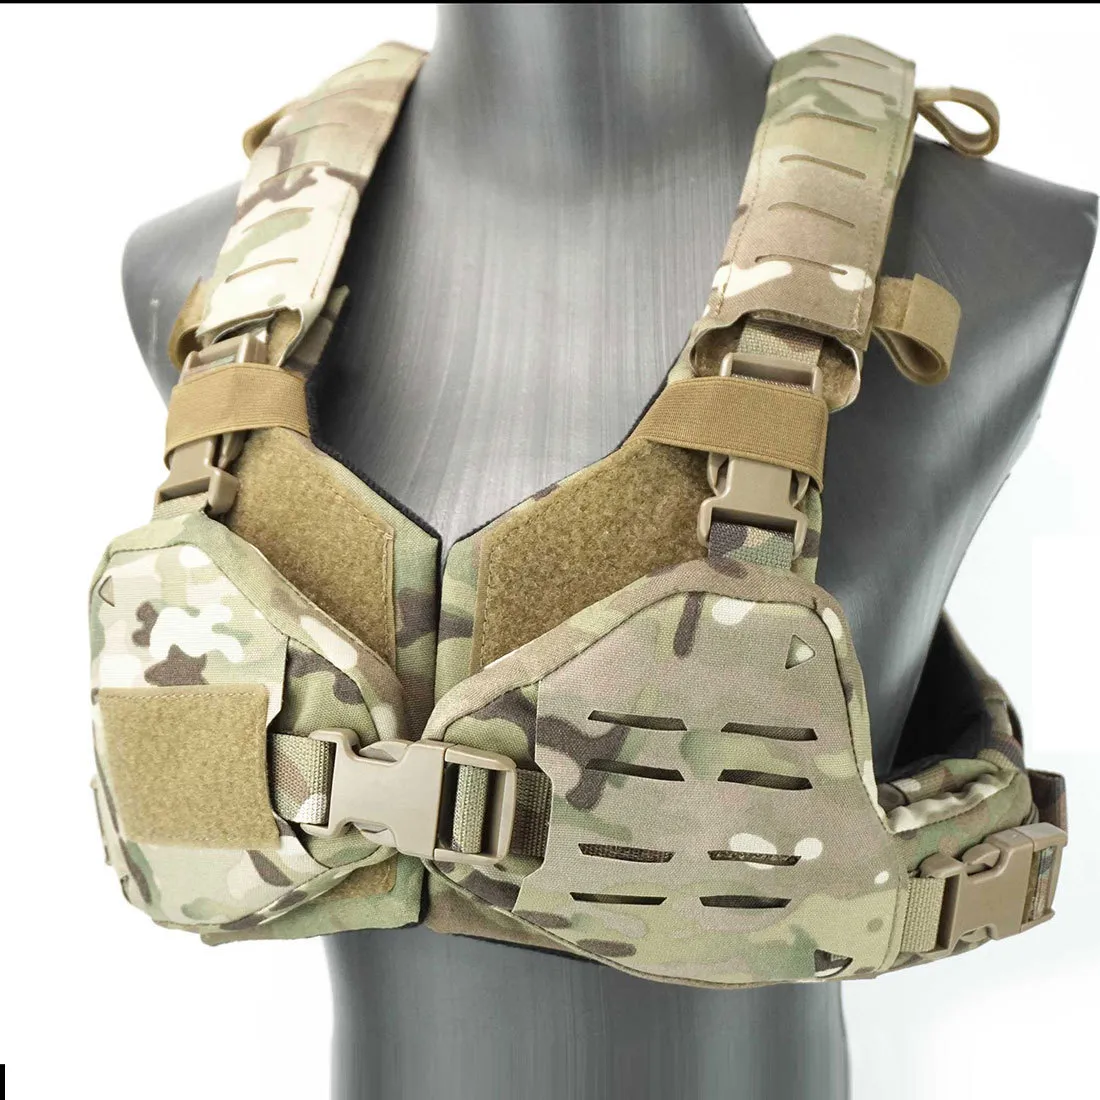 DMgear Tactical Pectoral Armor Tactical Vest Fashion For Women Sexy Chest  And Bikini Armor For Outdoor Cosplay And Hunting 201214 From Bai01, $94.87